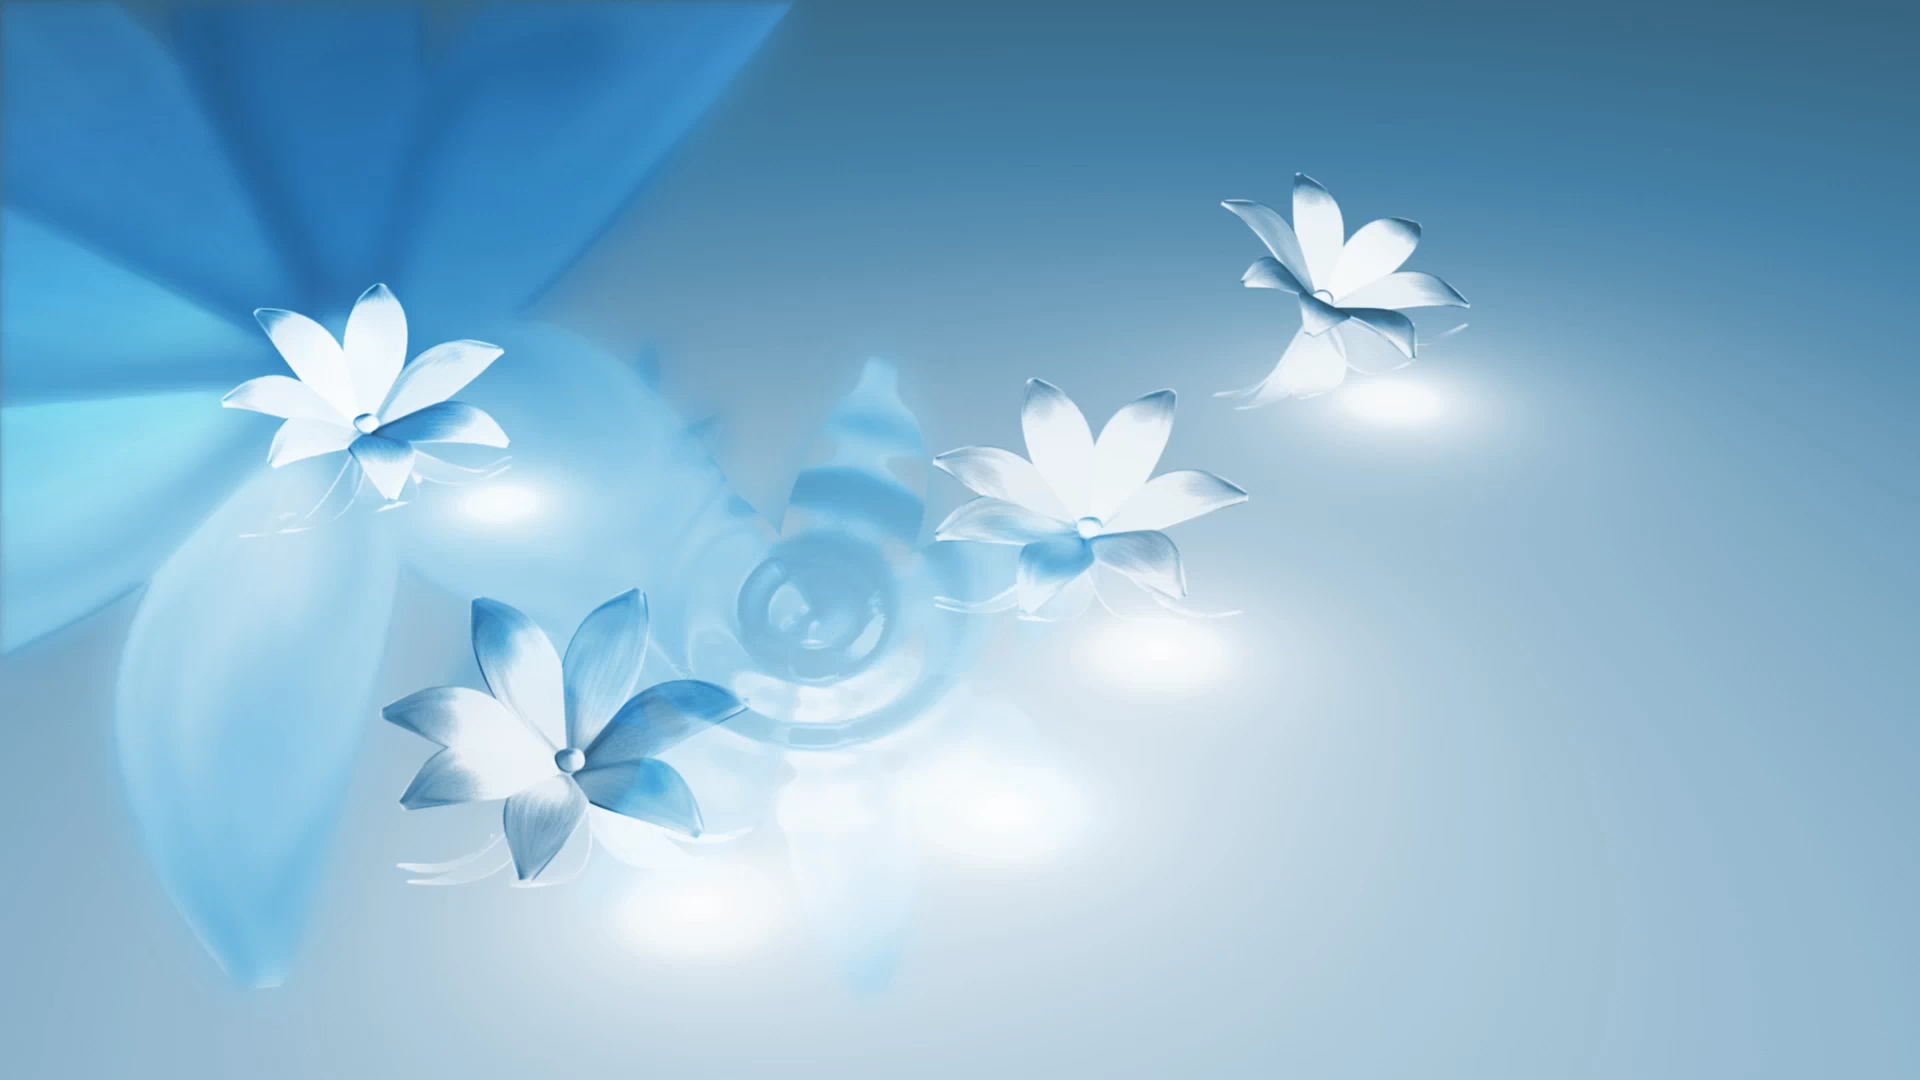 Blue Flower Free PPT Backgrounds for your PowerPoint Templates